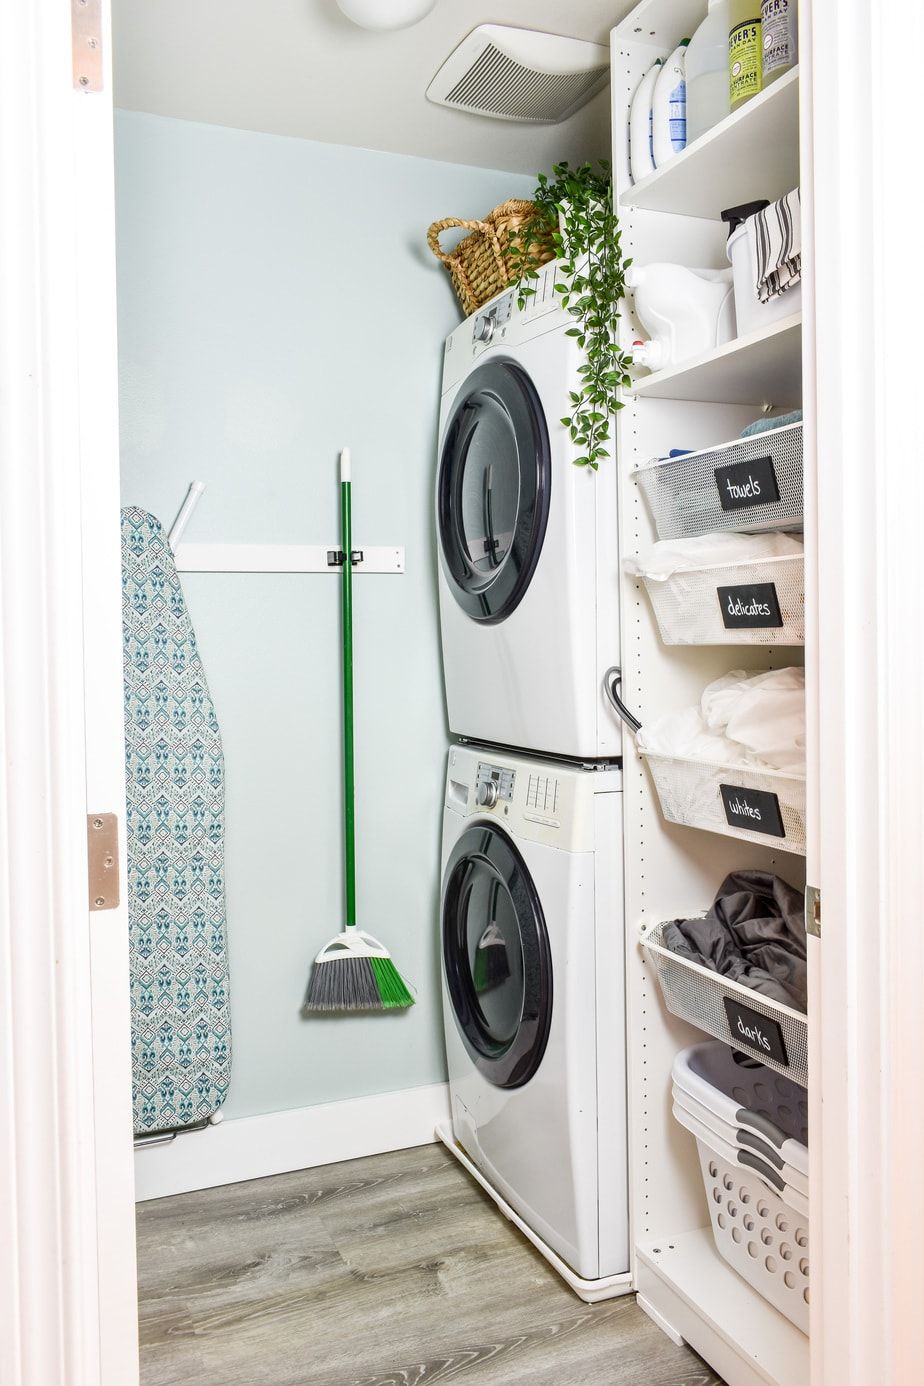 27 Clever Laundry Room Ideas How To, Laundry Room Shelving Ideas